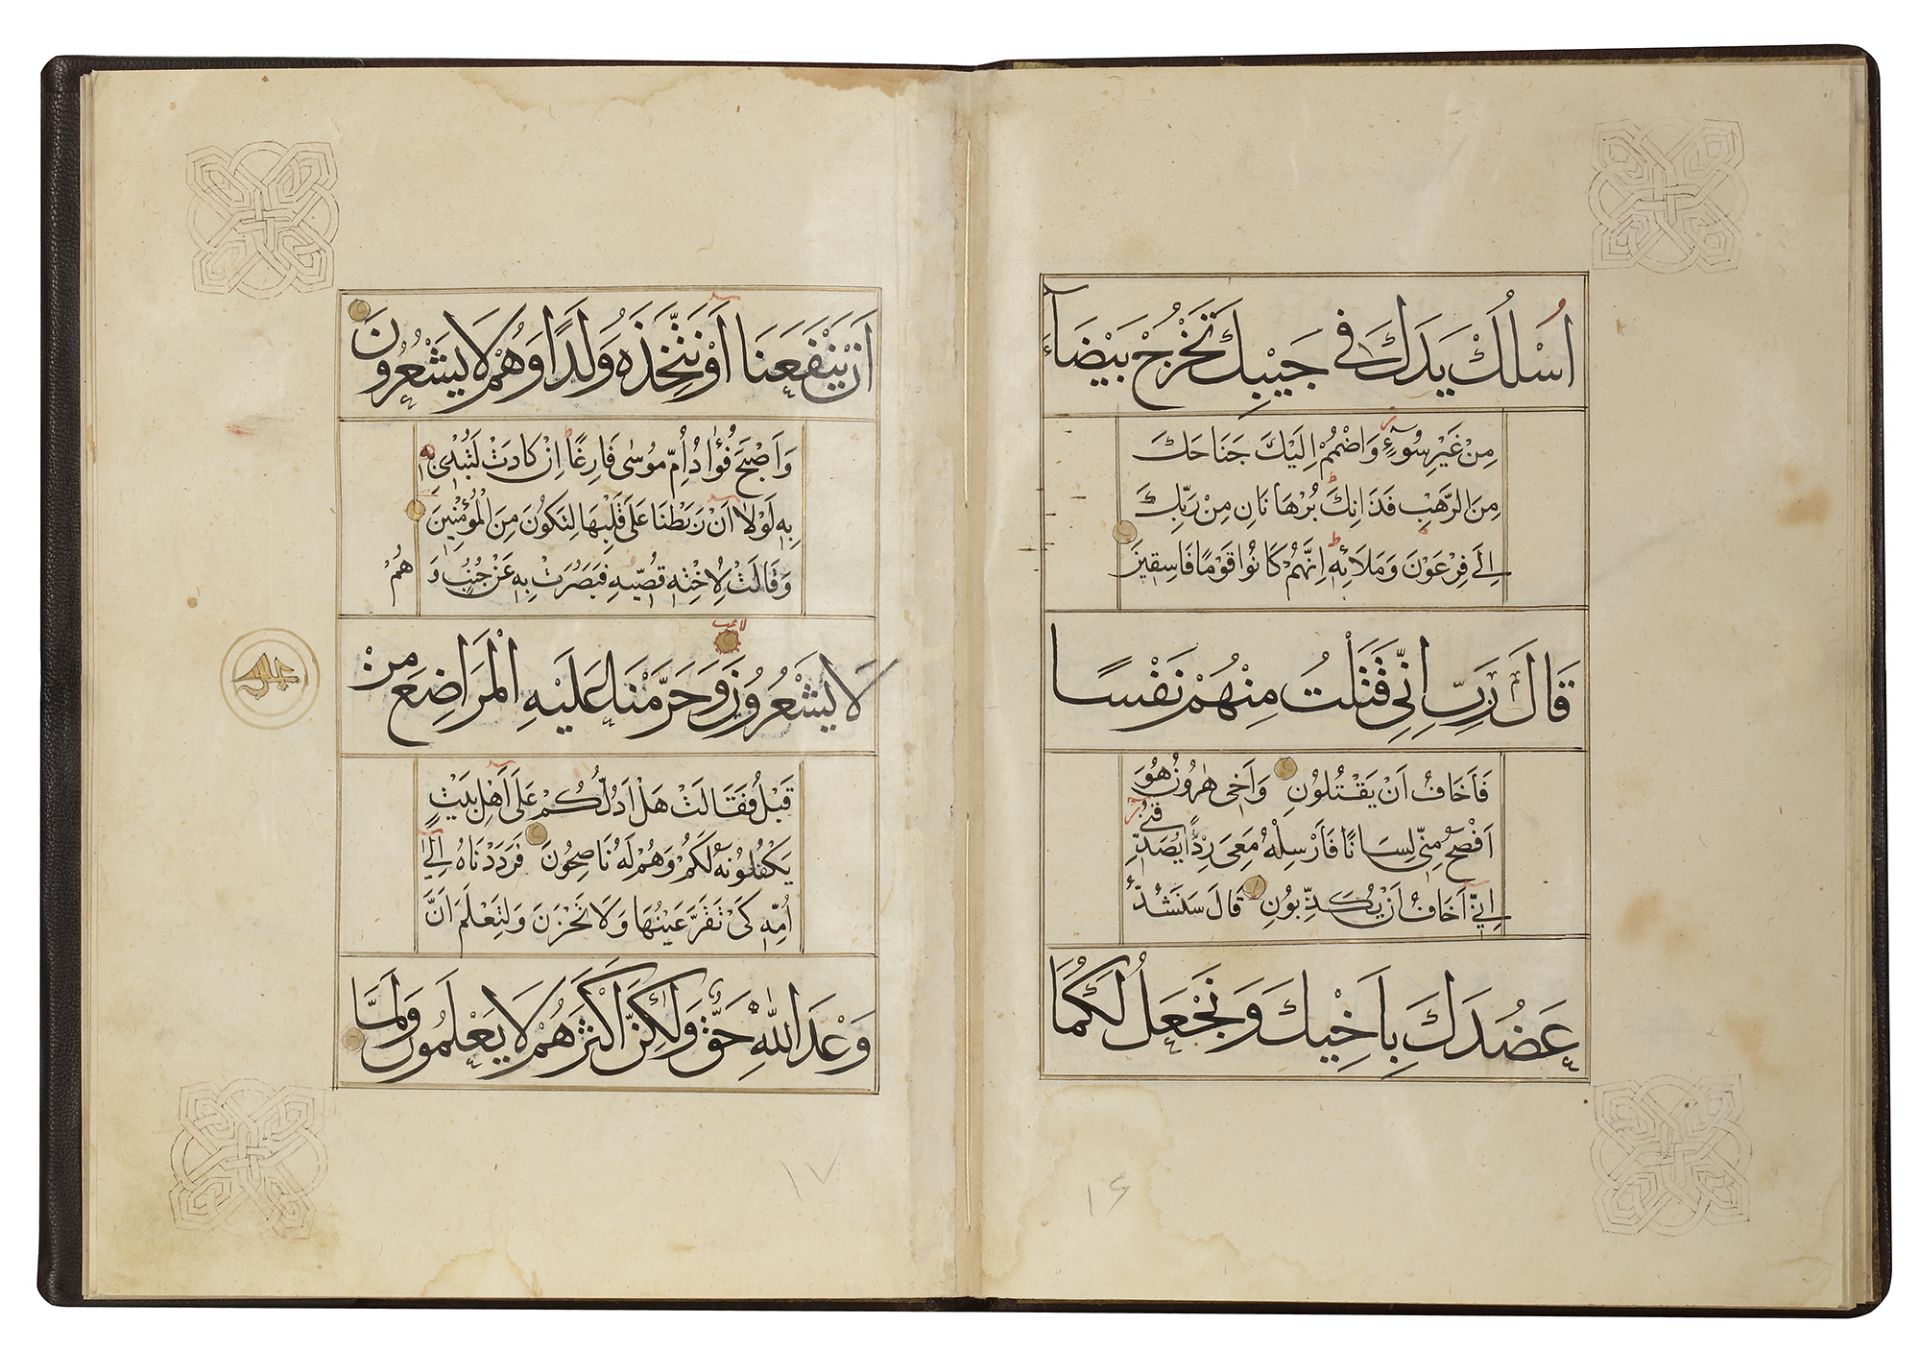 A LATE TIMURID QURAN JUZ, BY AHMED AL-RUMI IN 858 AH/1454 AD - Image 3 of 4